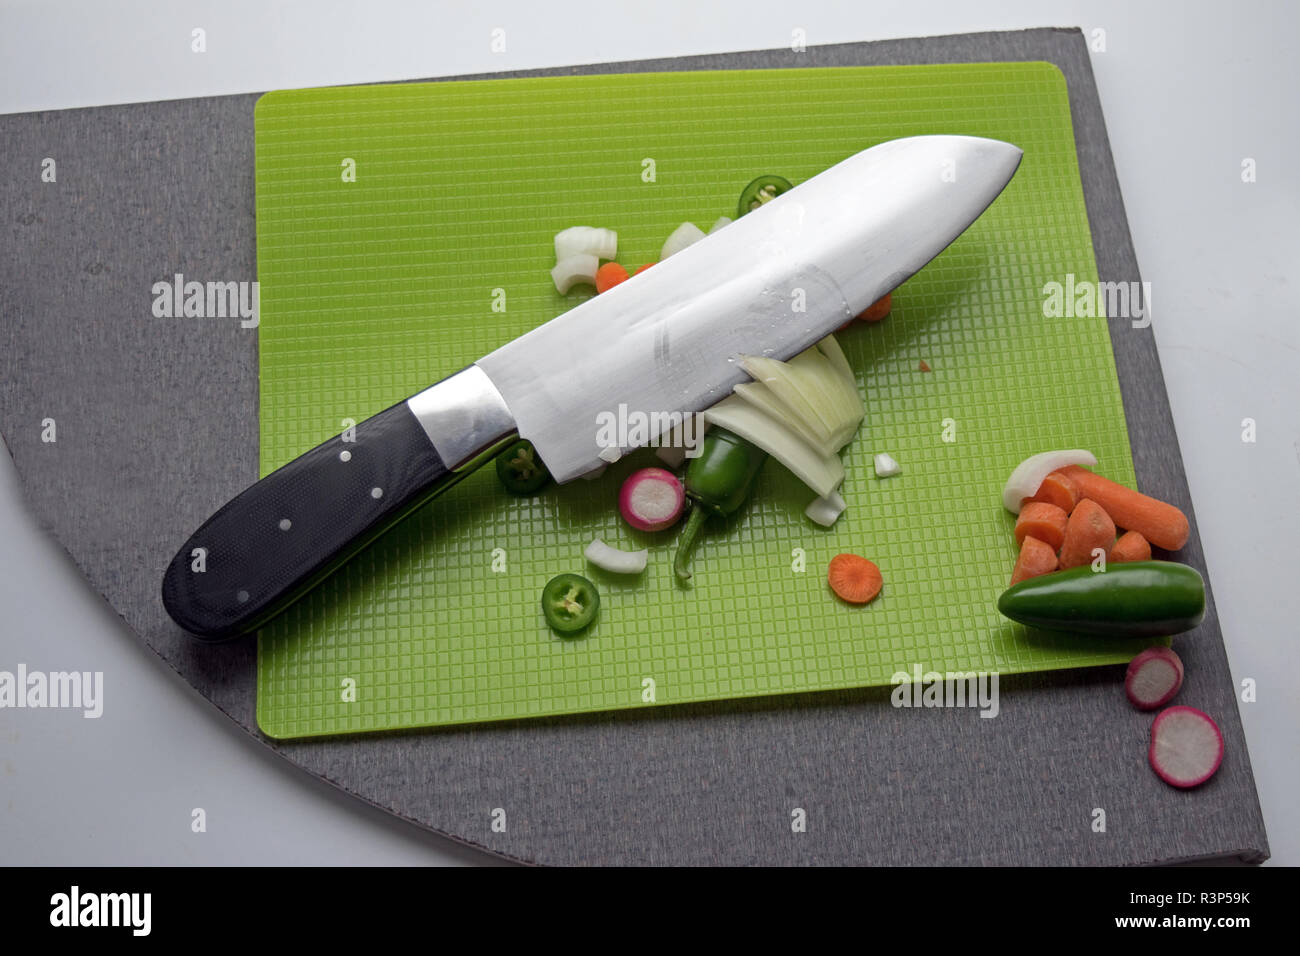 A big knife is used to cut up vegetables on a green cutting mat. Stock Photo